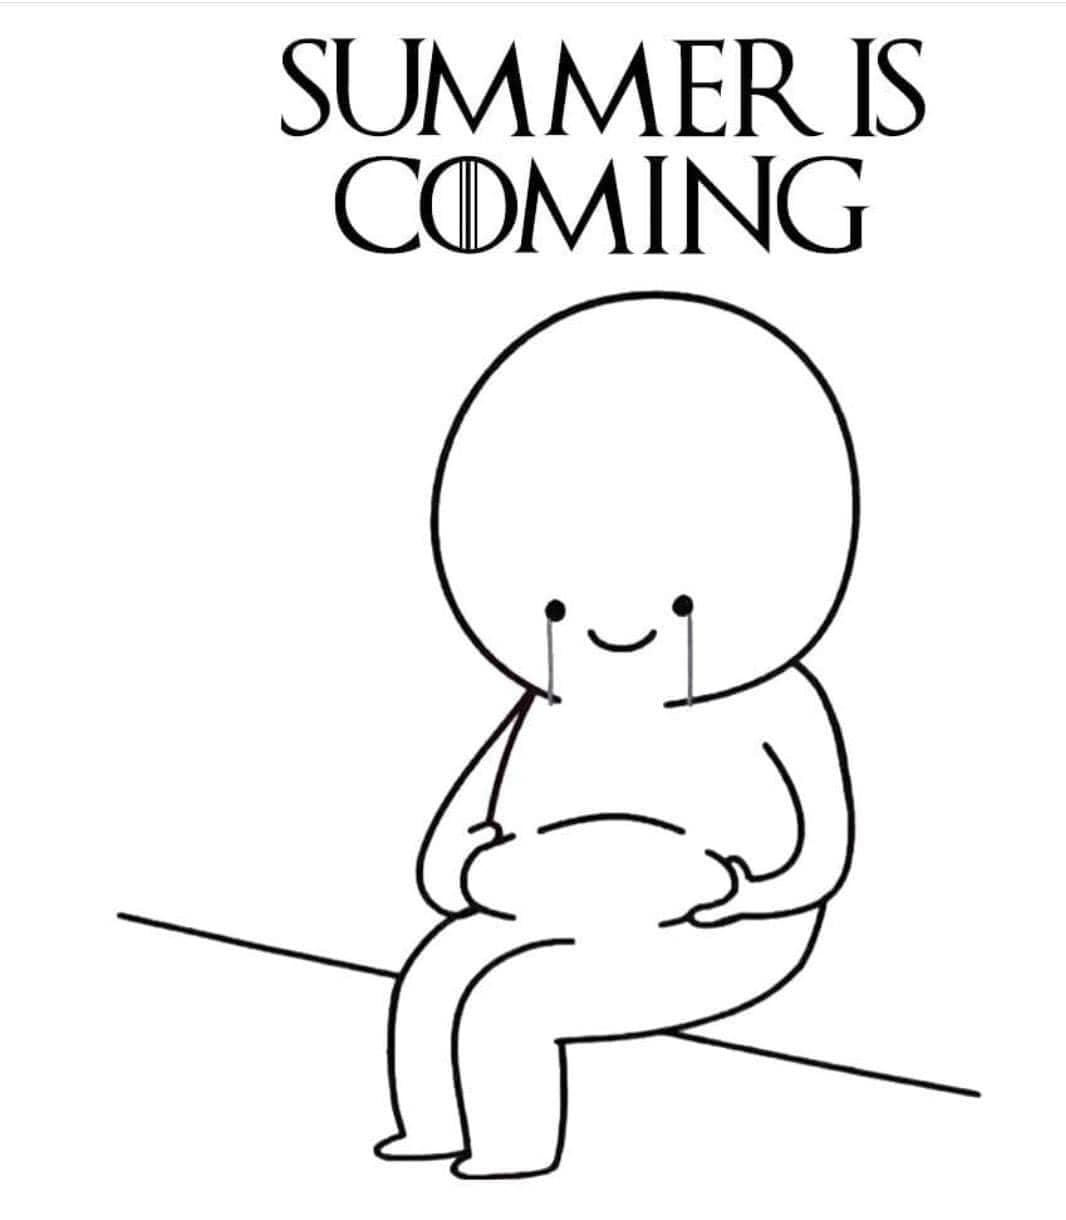 Summer is comming